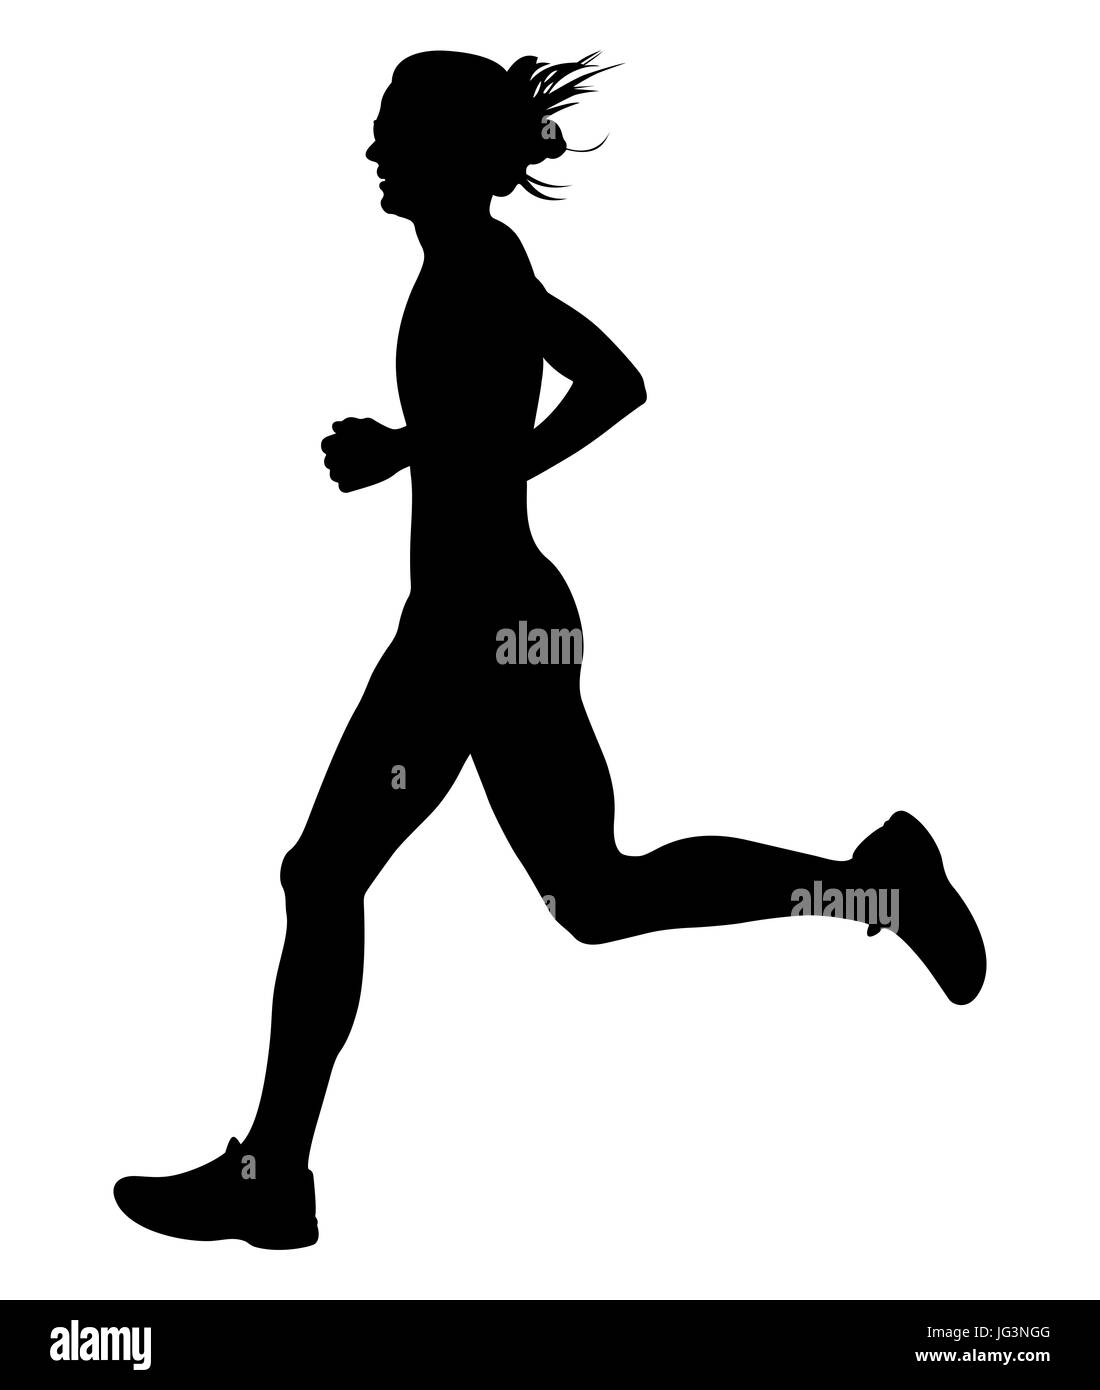 slender young woman athlete runner black silhouette Stock Photo